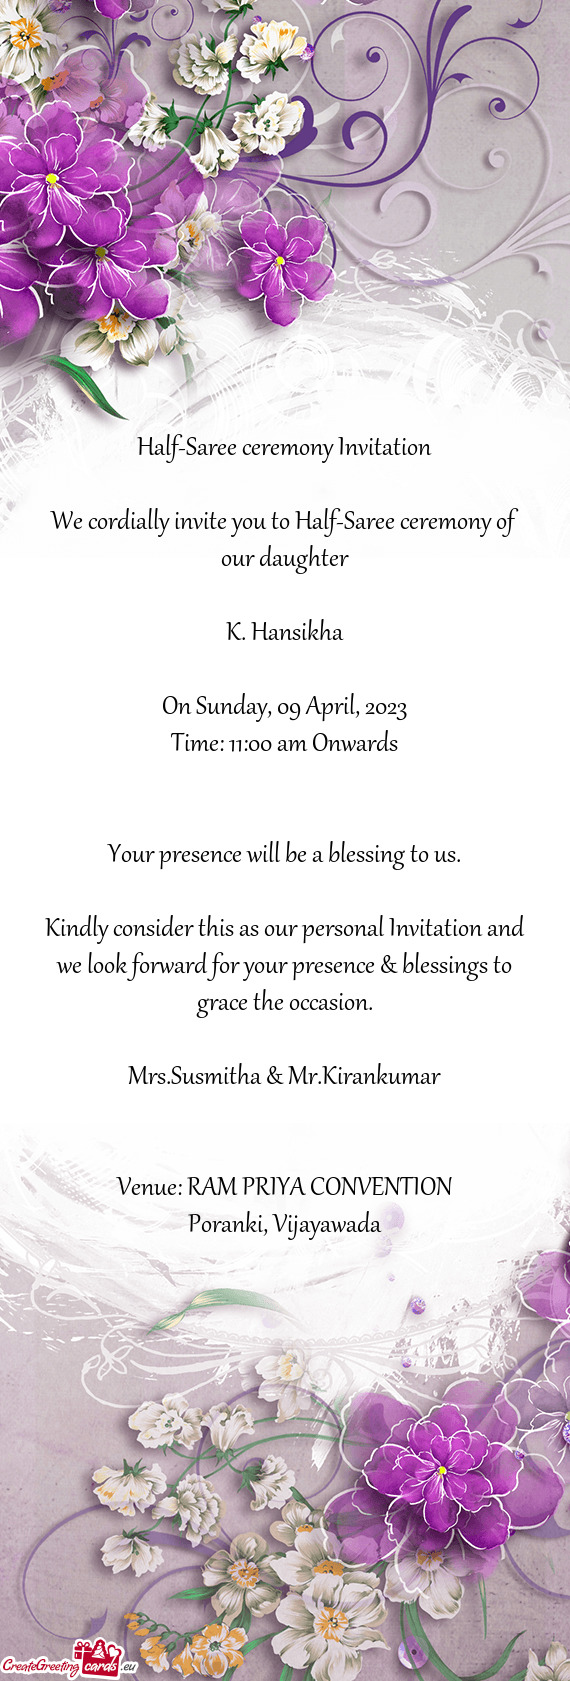 We cordially invite you to Half-Saree ceremony of our daughter